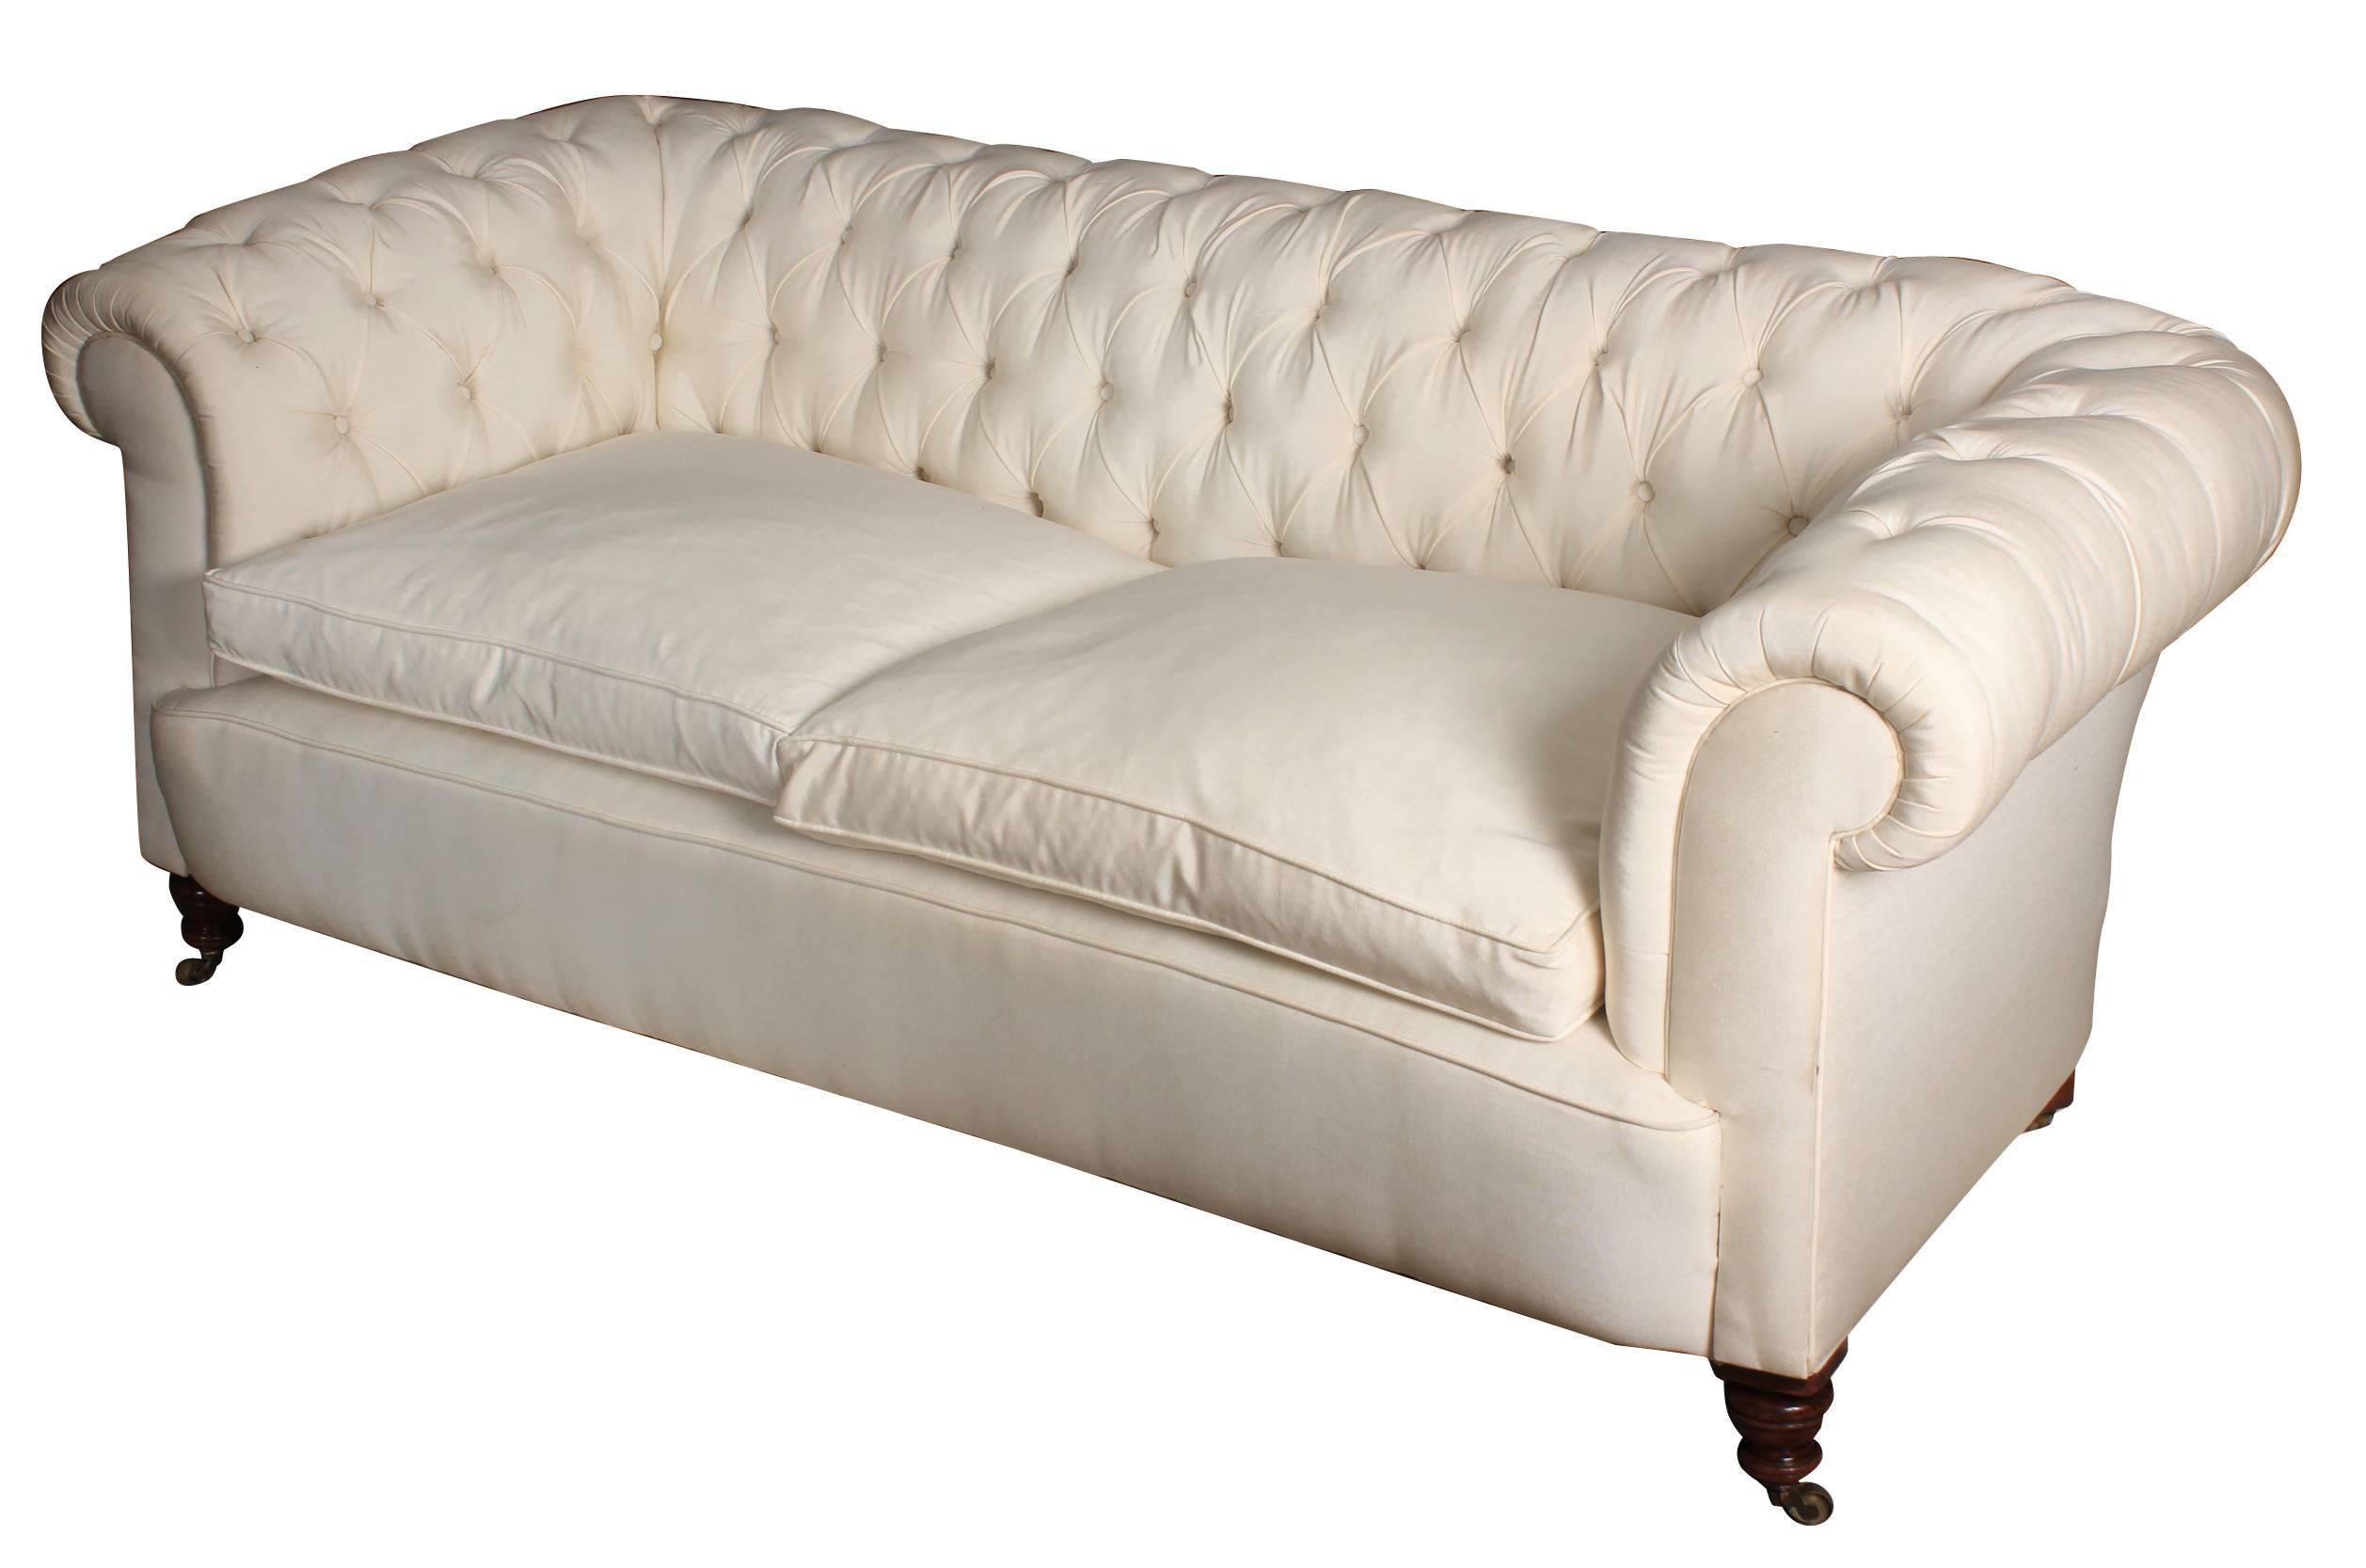 Mid-19th Century Victorian Chesterfield Sofa For Sale